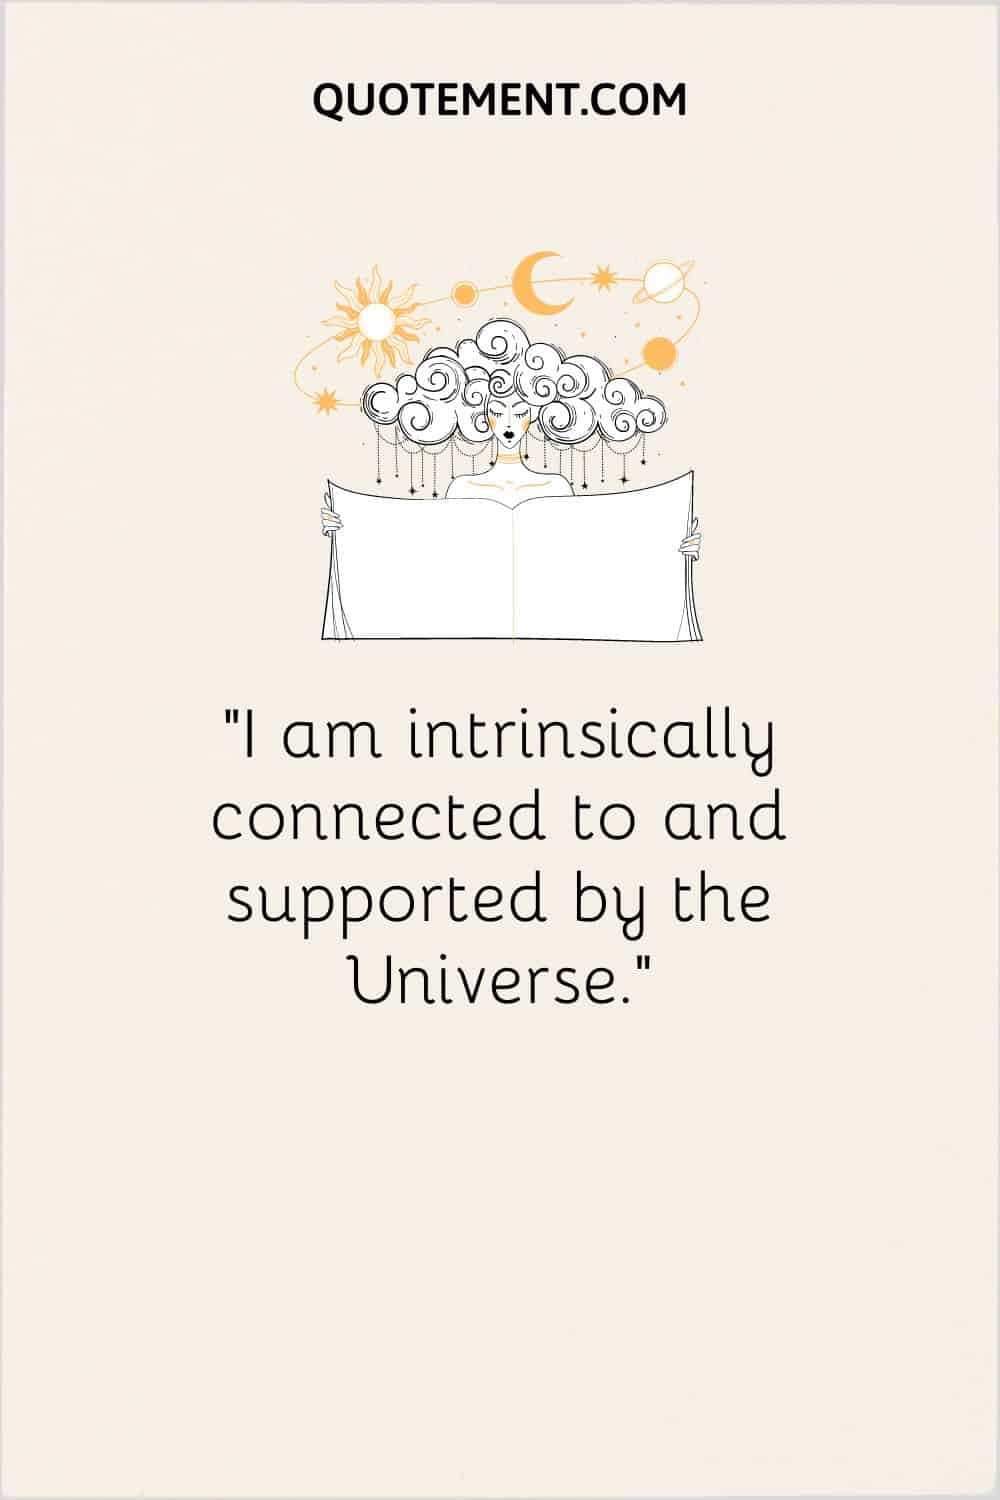 I am intrinsically connected to and supported by the Universe